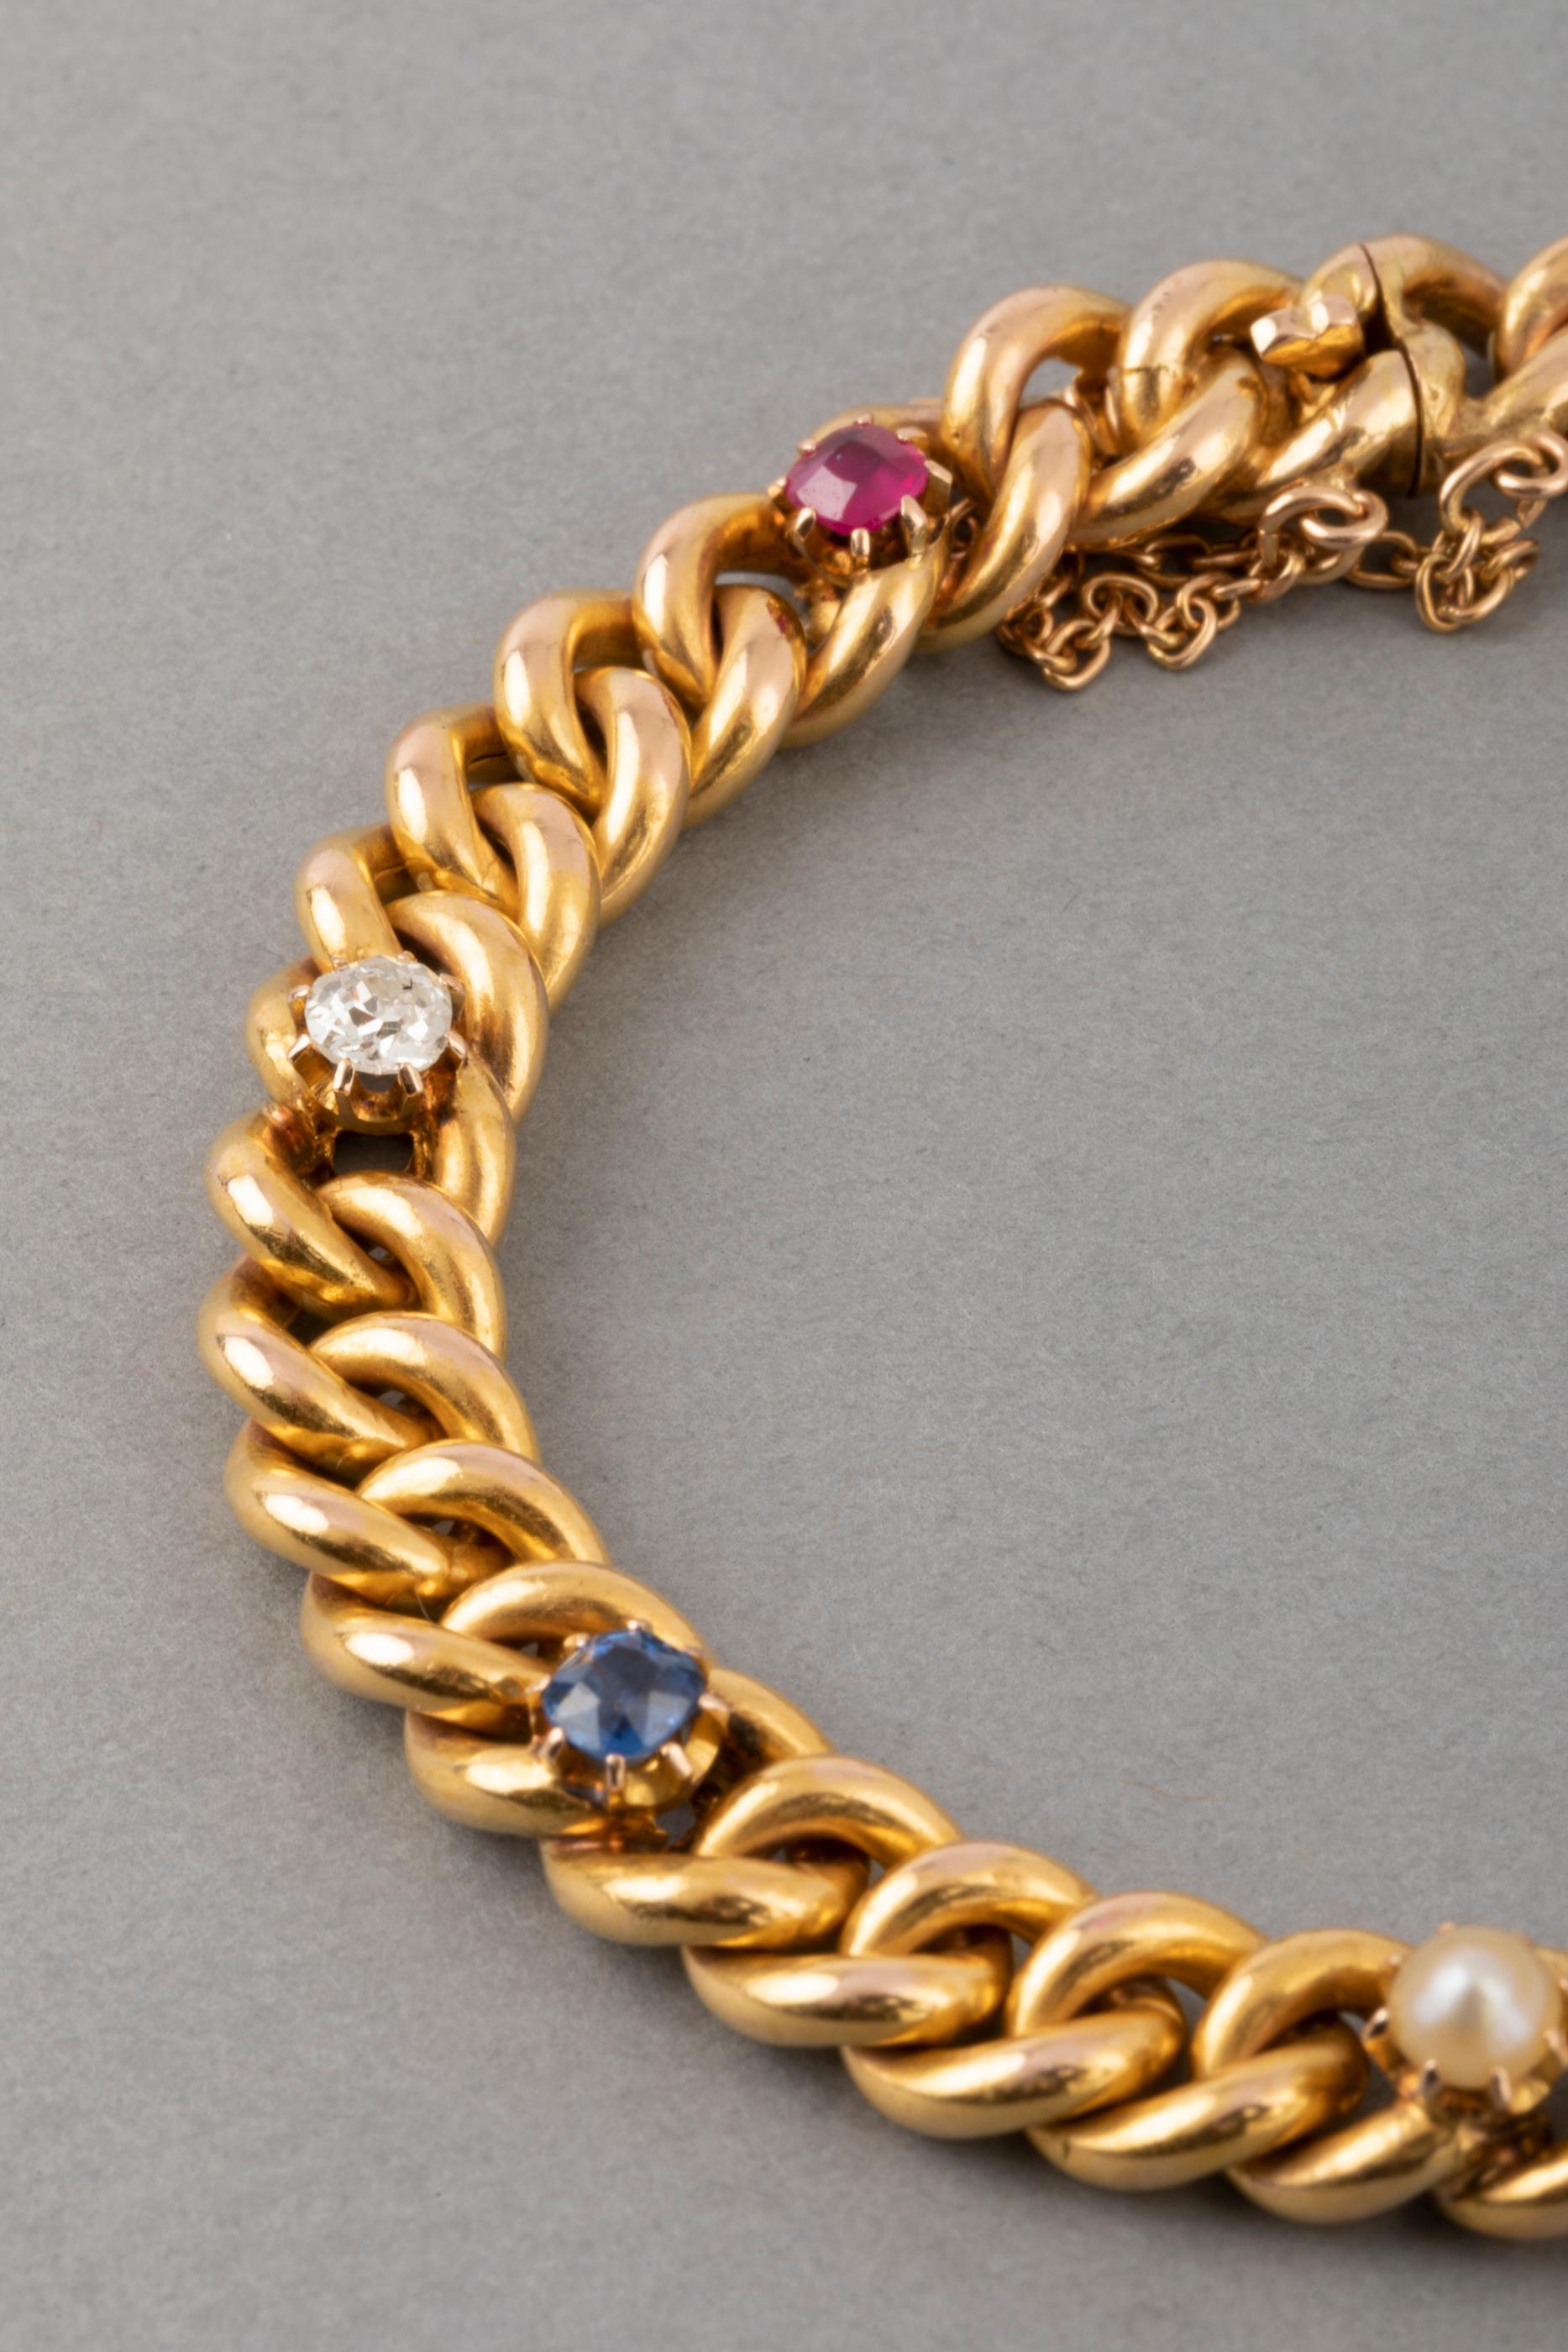 Gold and Precious Stones French Bracelet 2